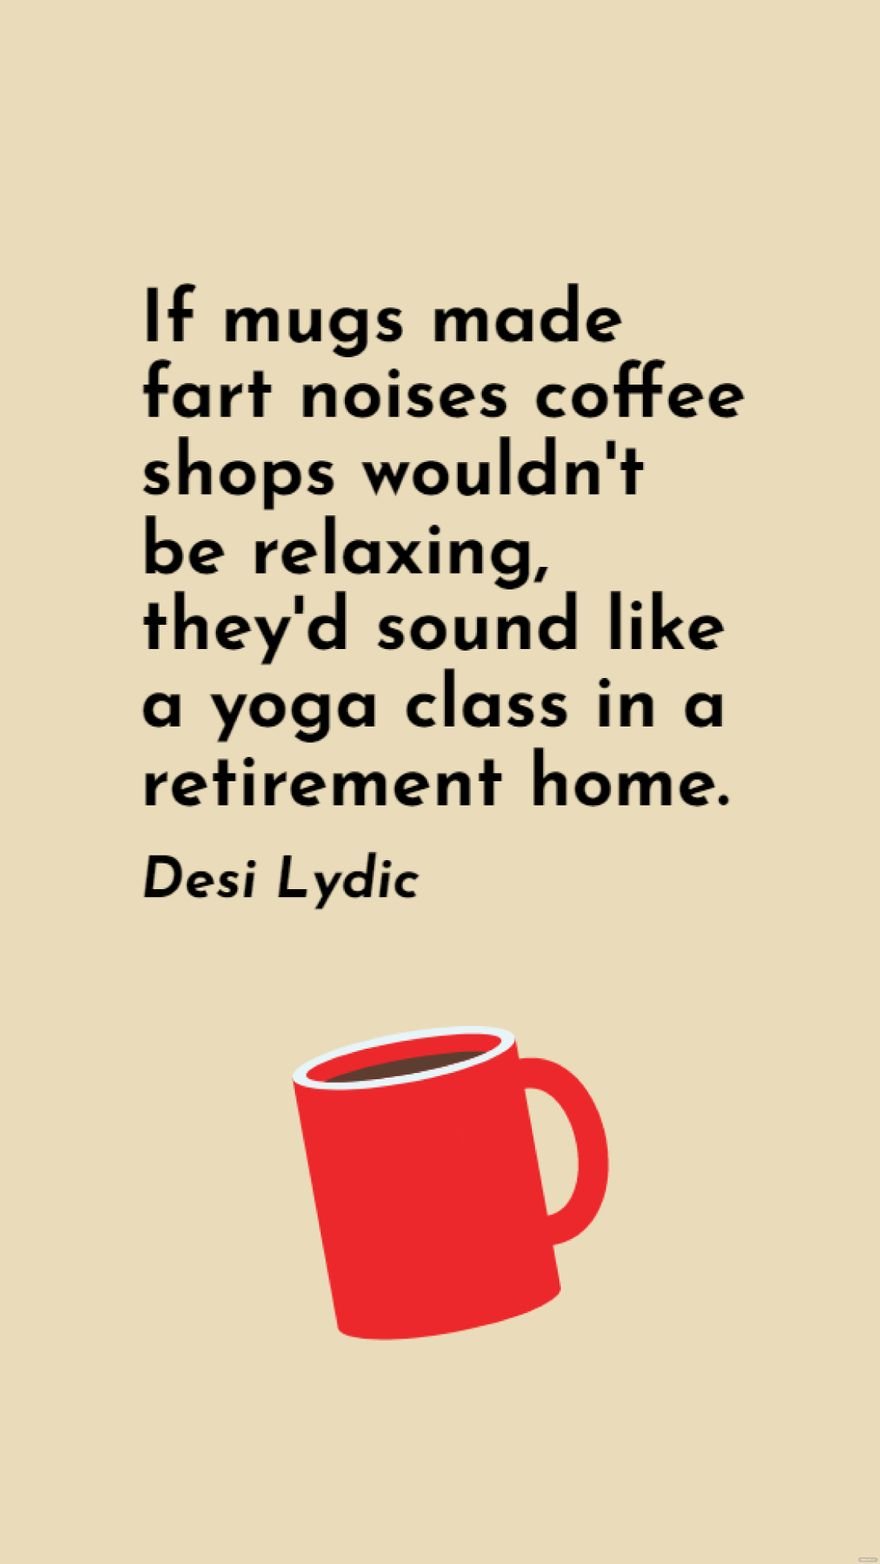 Free Desi Lydic - If mugs made fart noises coffee shops wouldn't be relaxing, they'd sound like a yoga class in a retirement home.